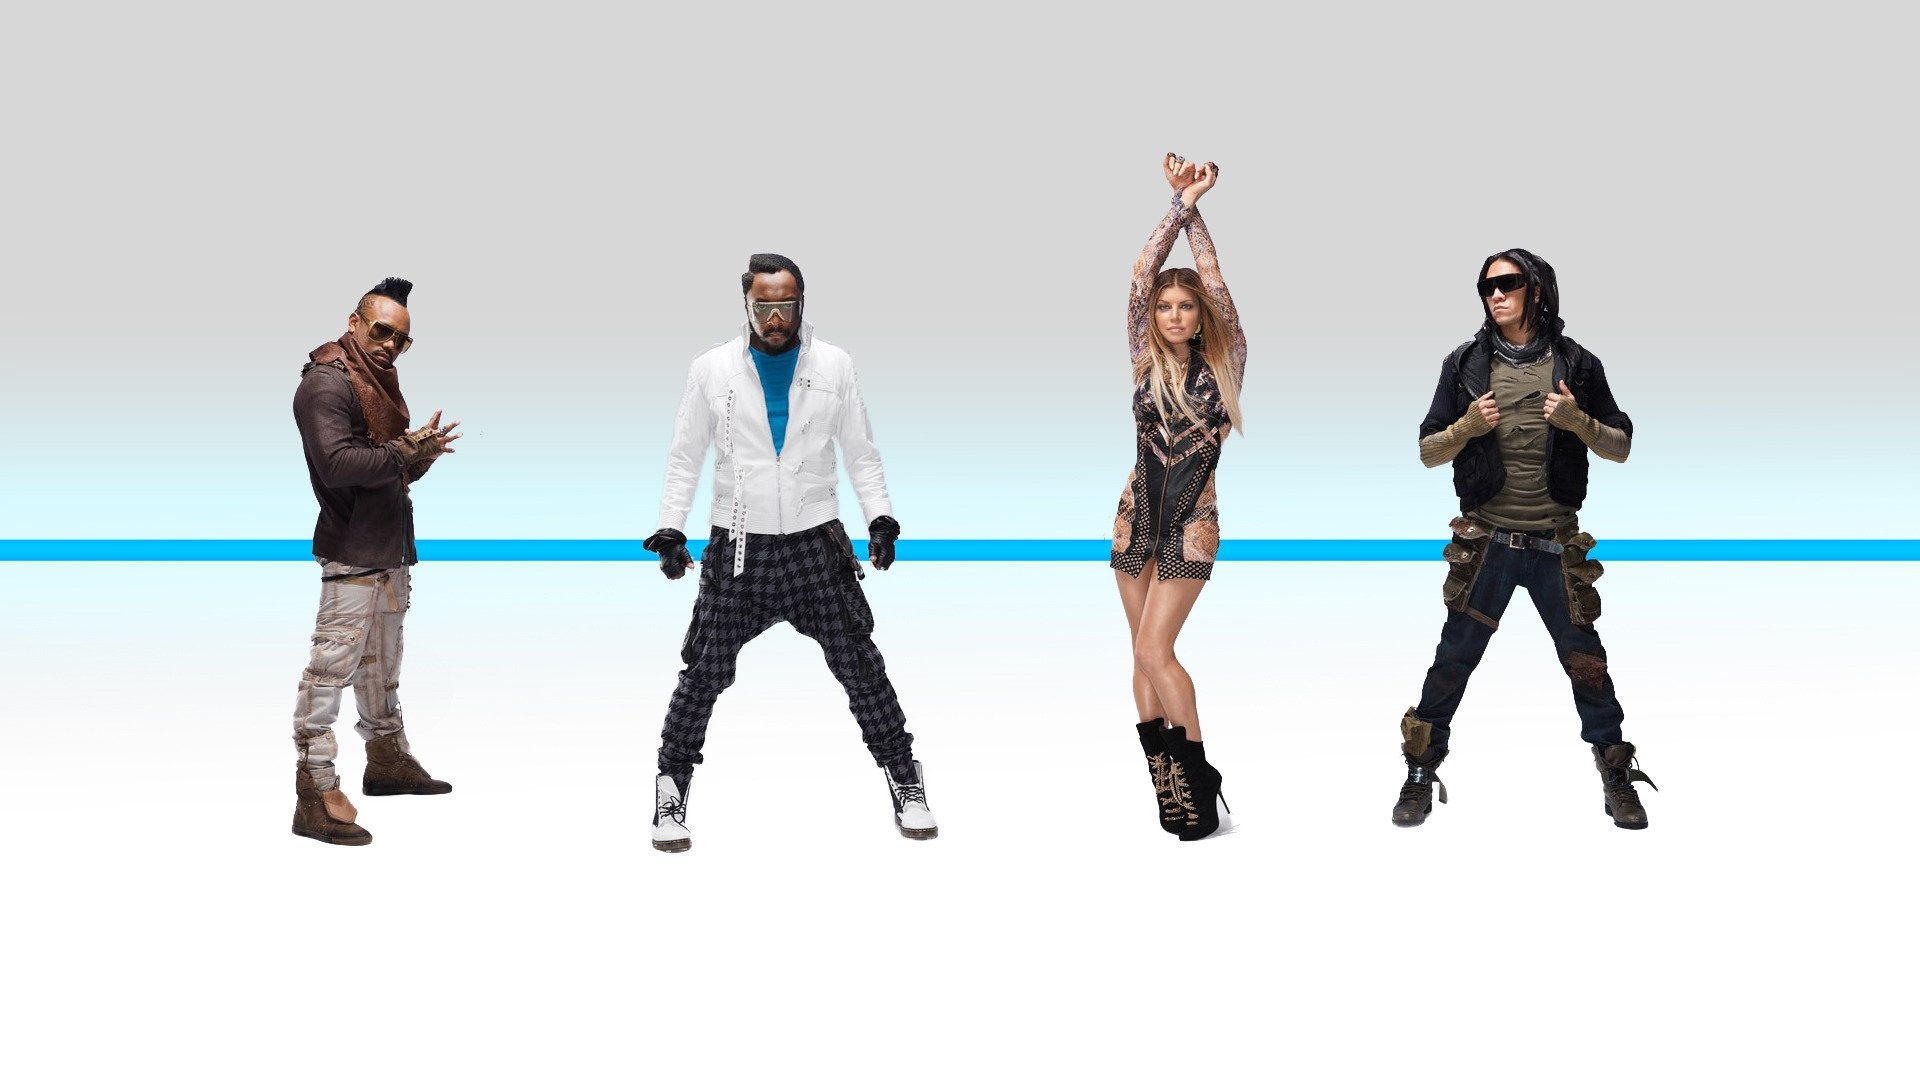 The Black Eyed Peas: “Let’s Get It Started”, Commercially successful single, Two million copies sold. 1920x1080 Full HD Background.